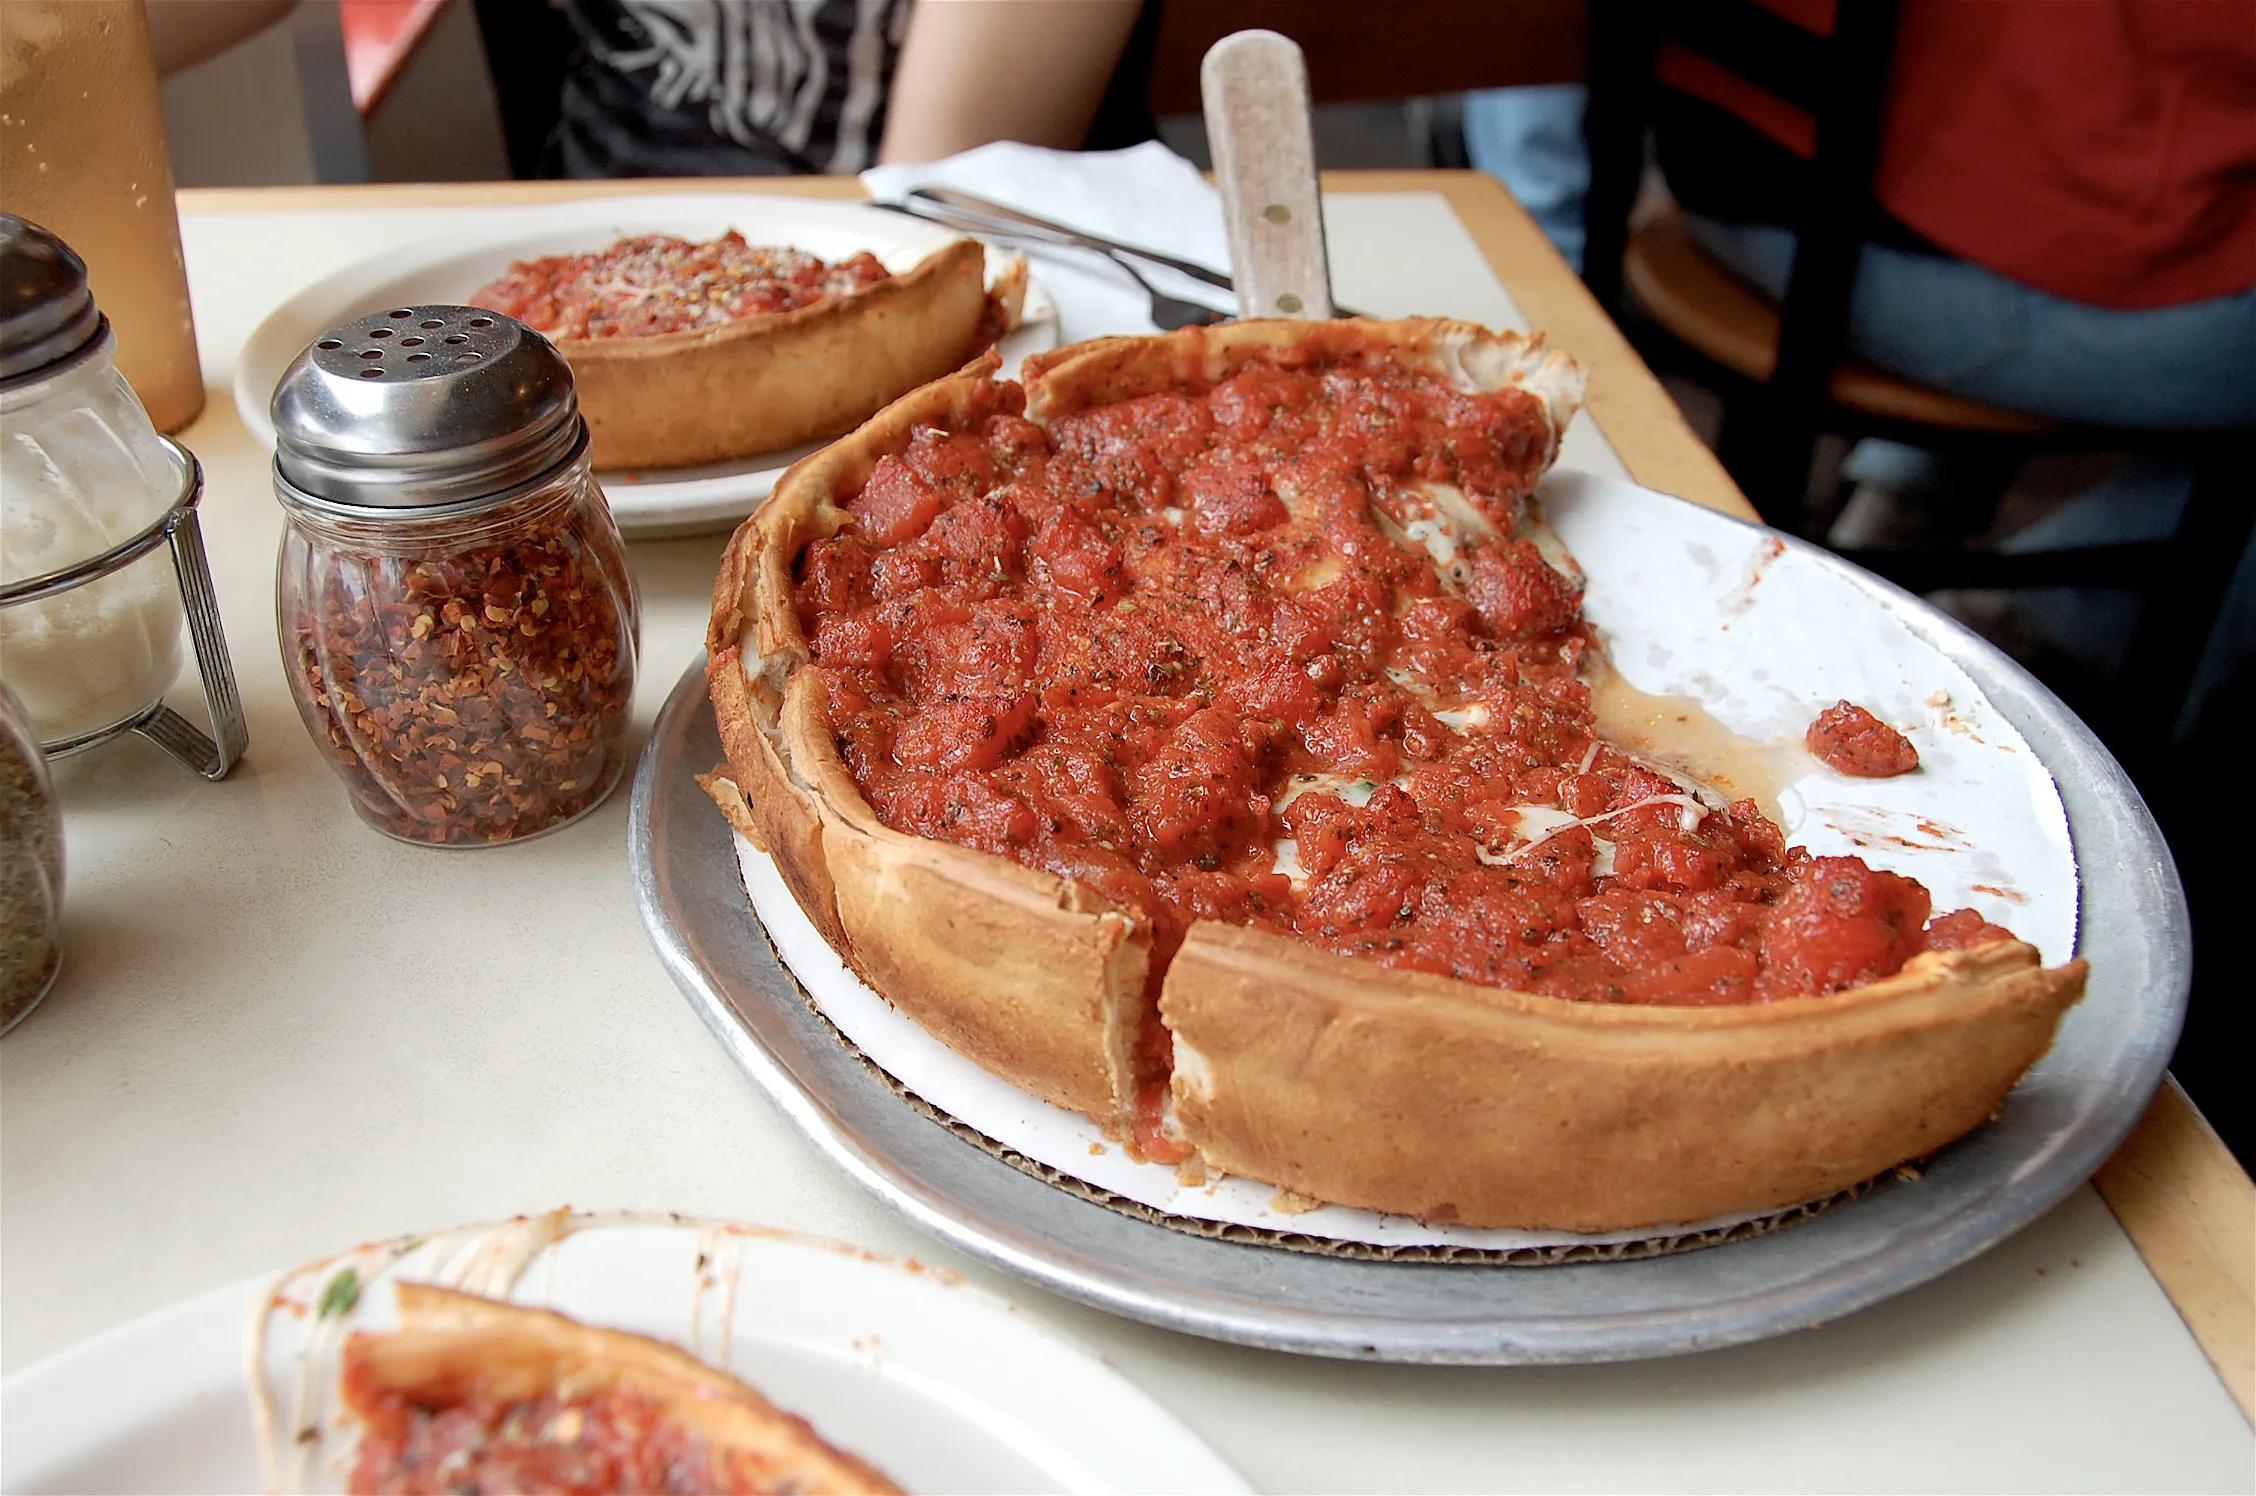 File:Chicago-style pizza.jpg - Wikimedia Commons